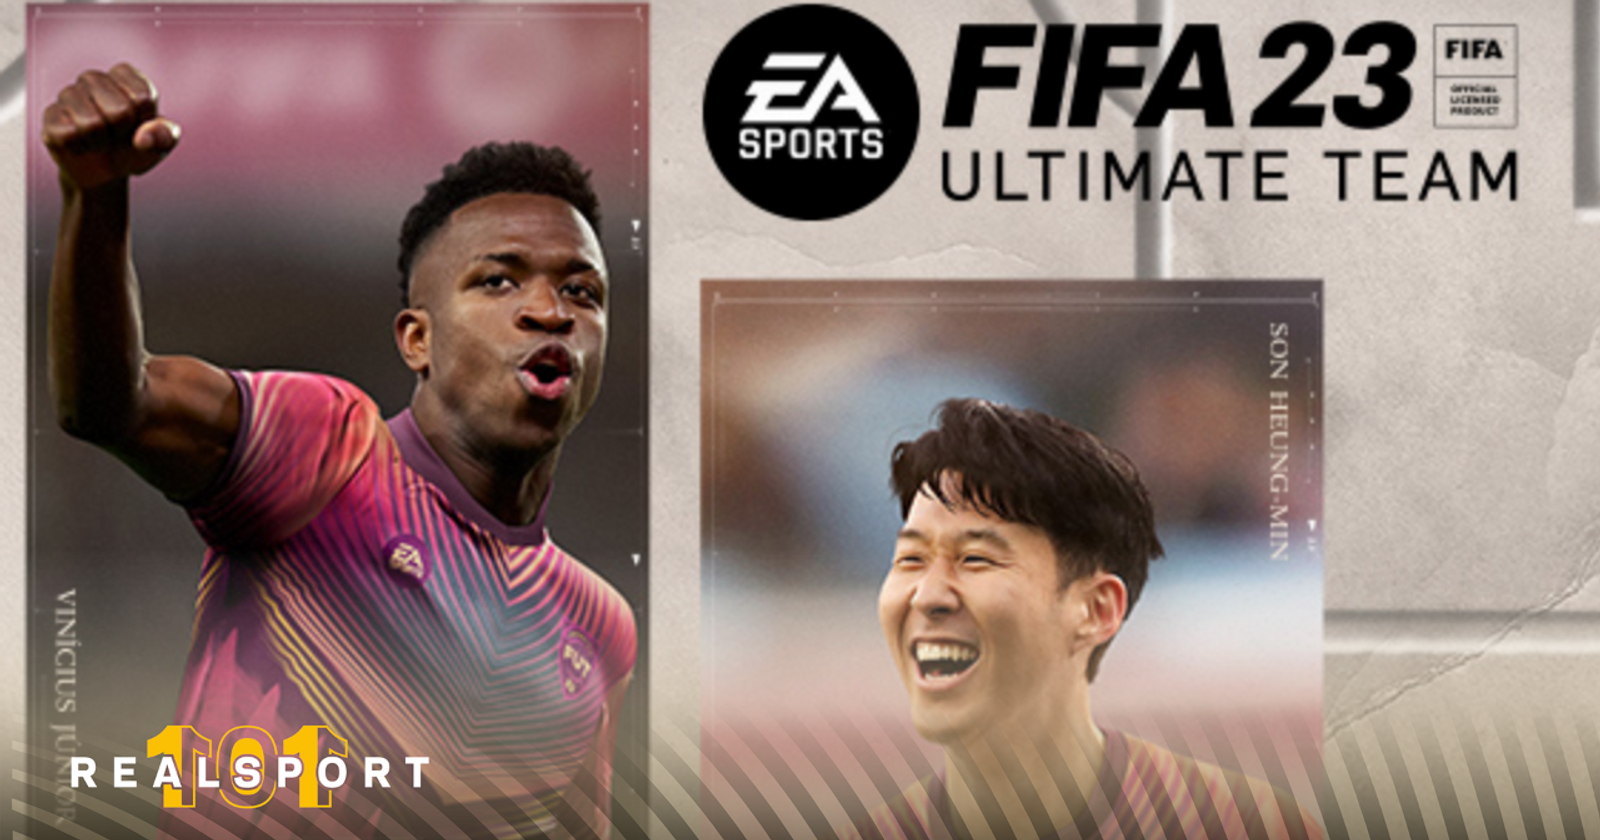 EA Sports FC 24 Prime Gaming Pack: How to claim your free FUT